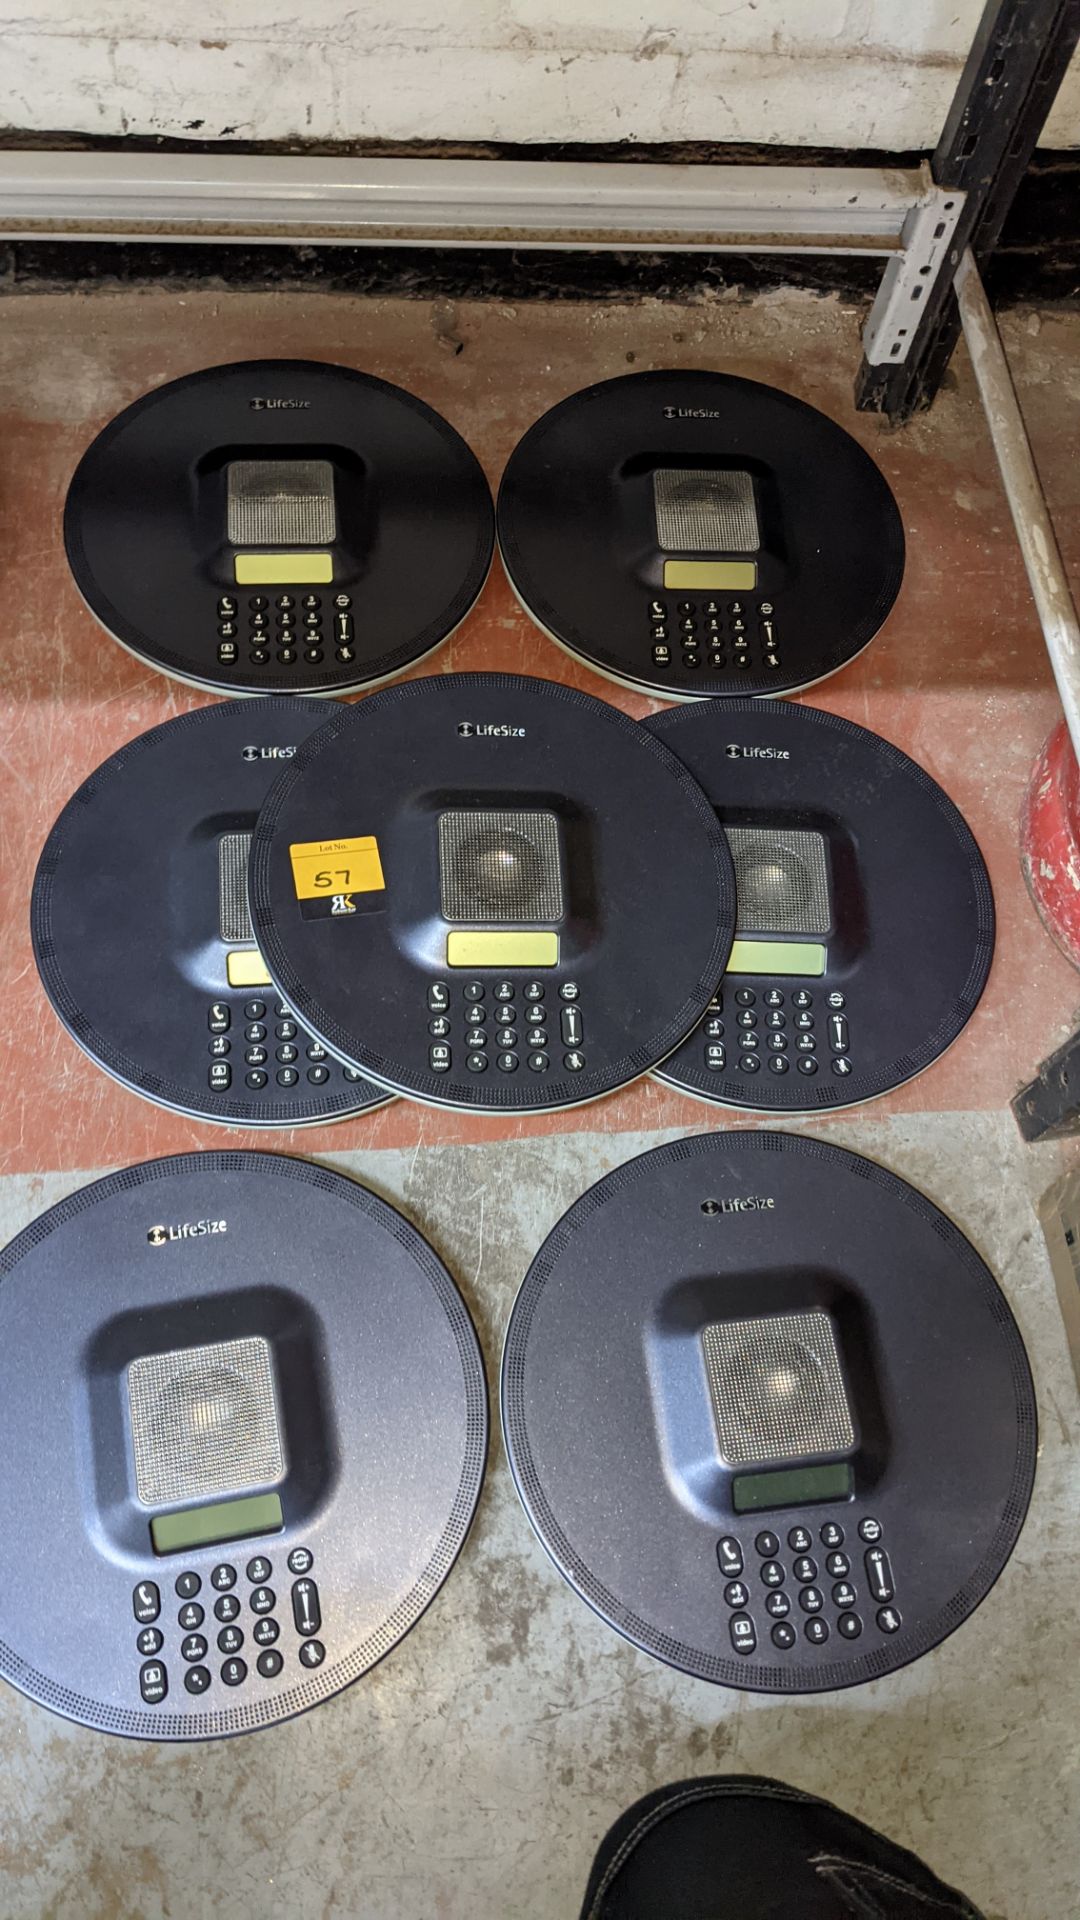 7 off LifeSize phones. NB lots 46 - 47, 53 - 57 & 88 all consist of LifeSize equipment - Image 6 of 9